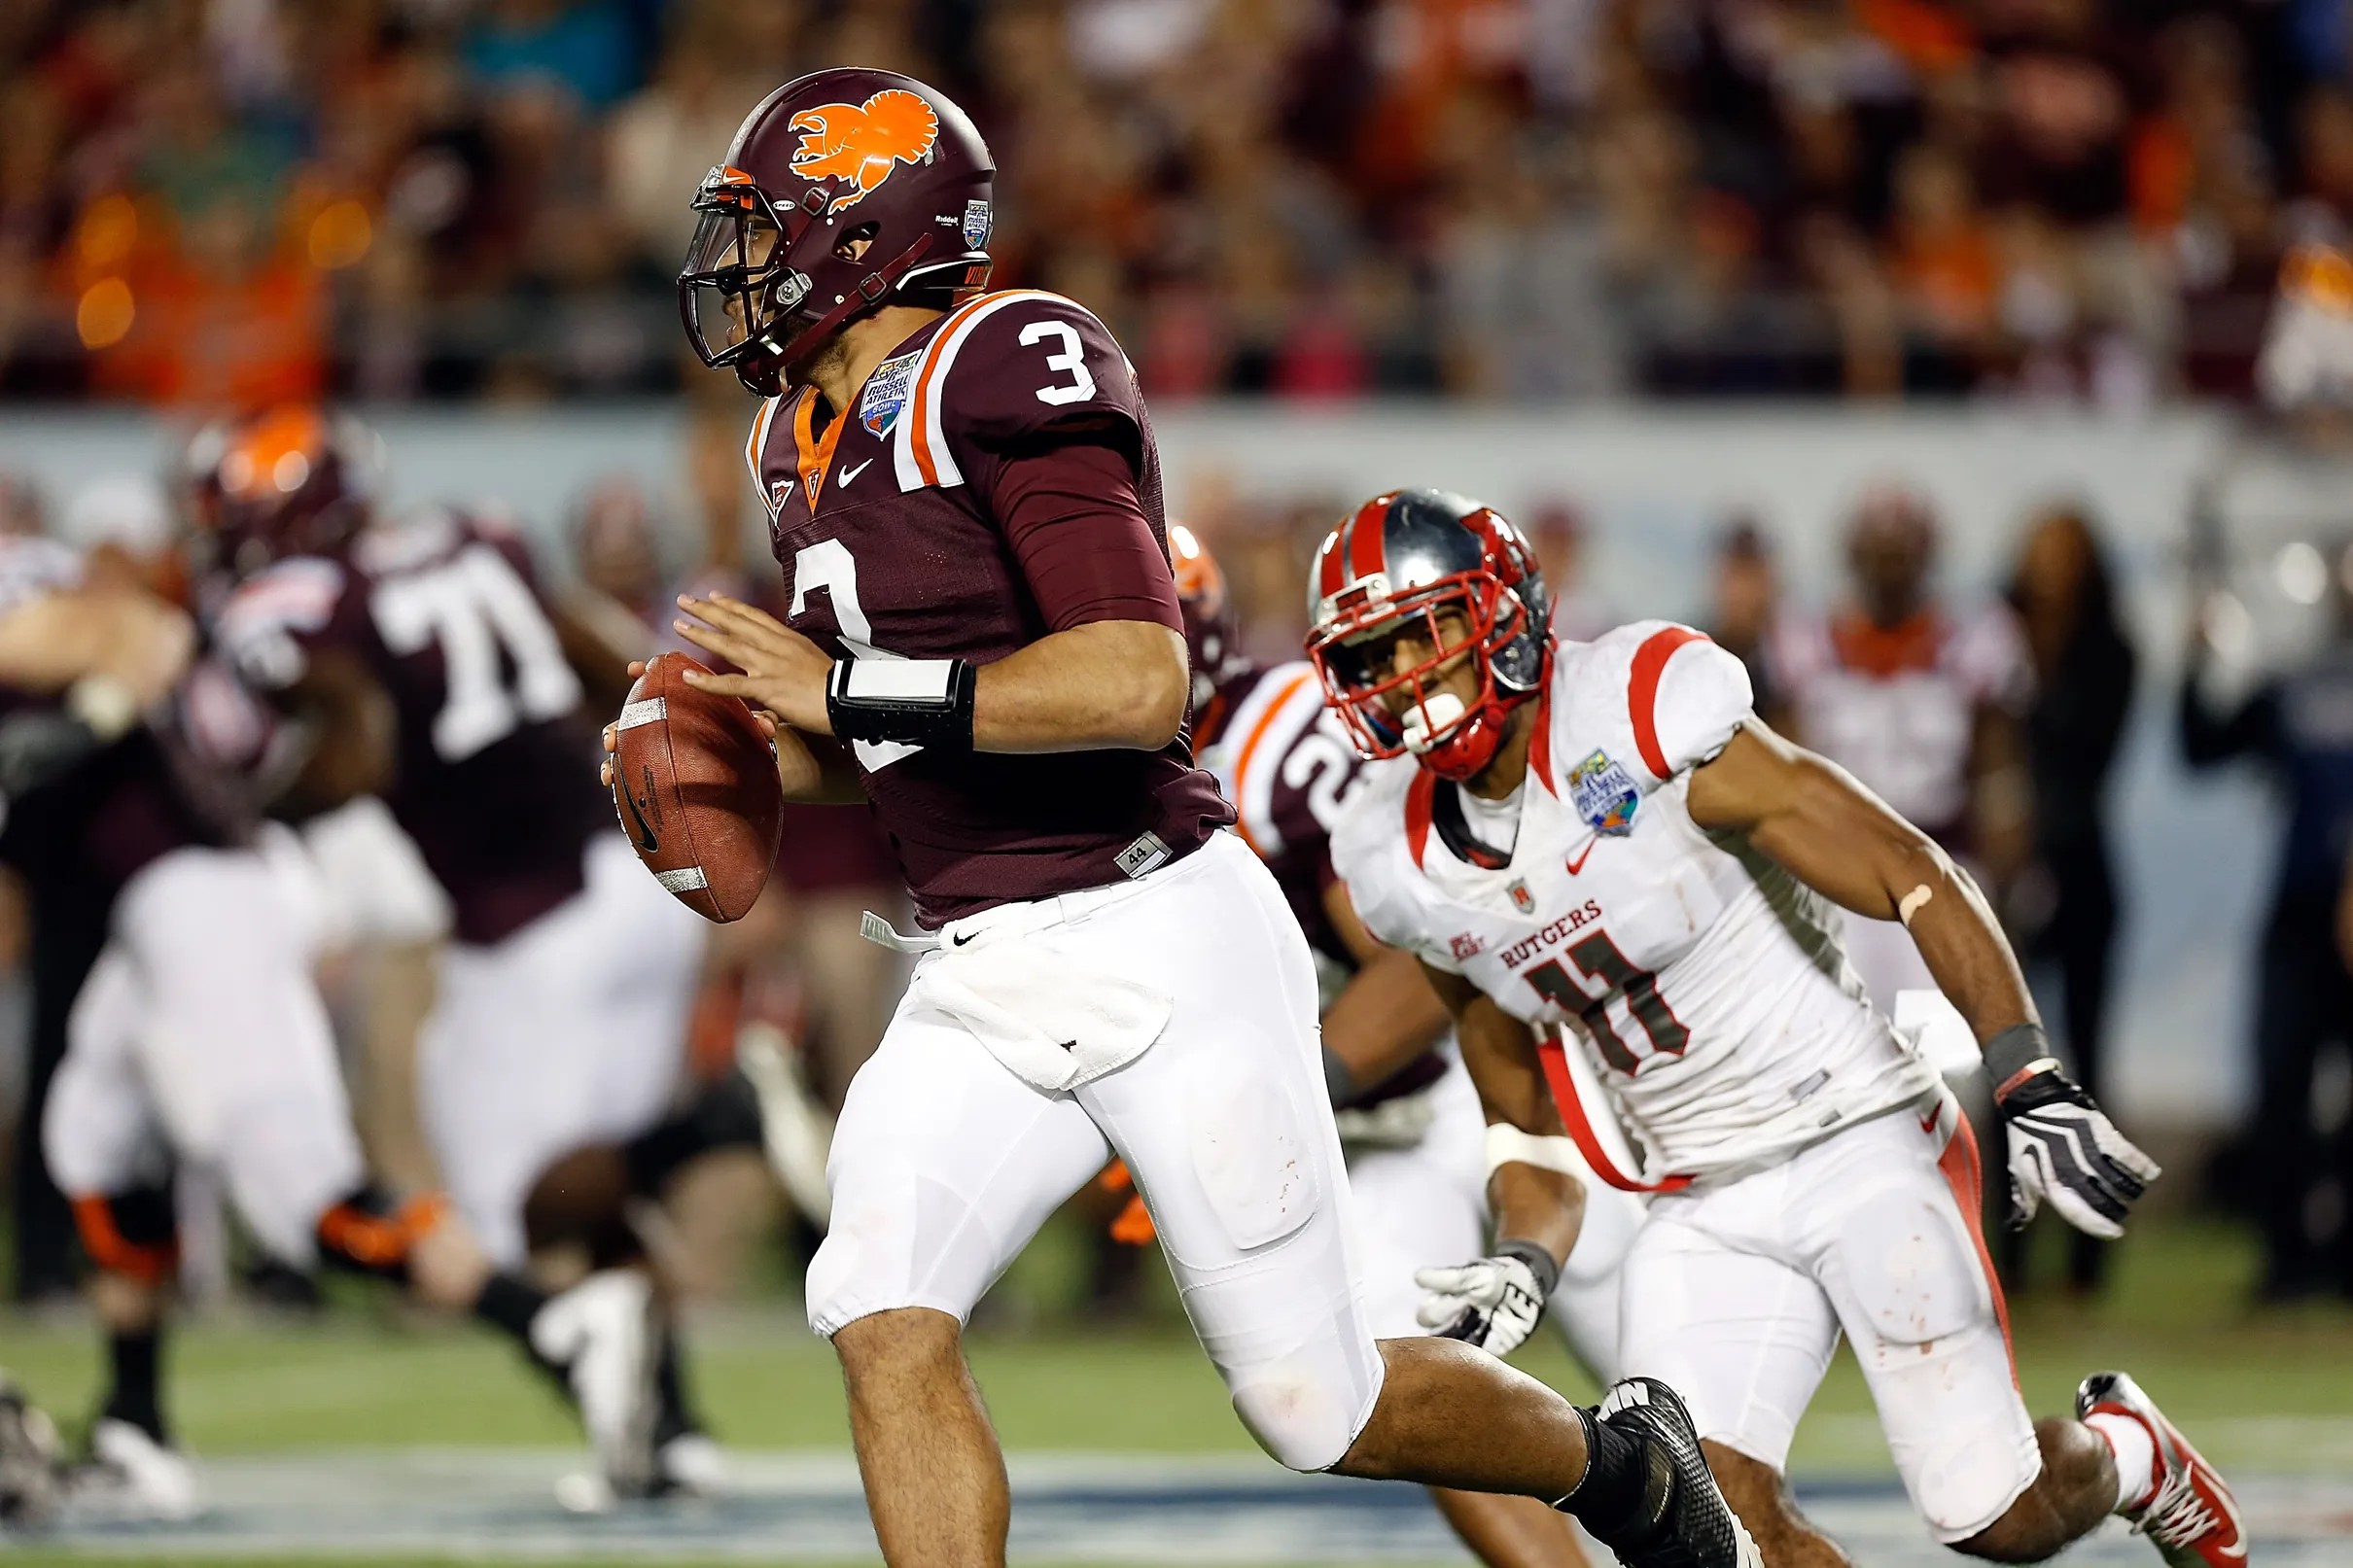 Virginia Tech vs. Rutgers How to watch, listen, live stream and odds